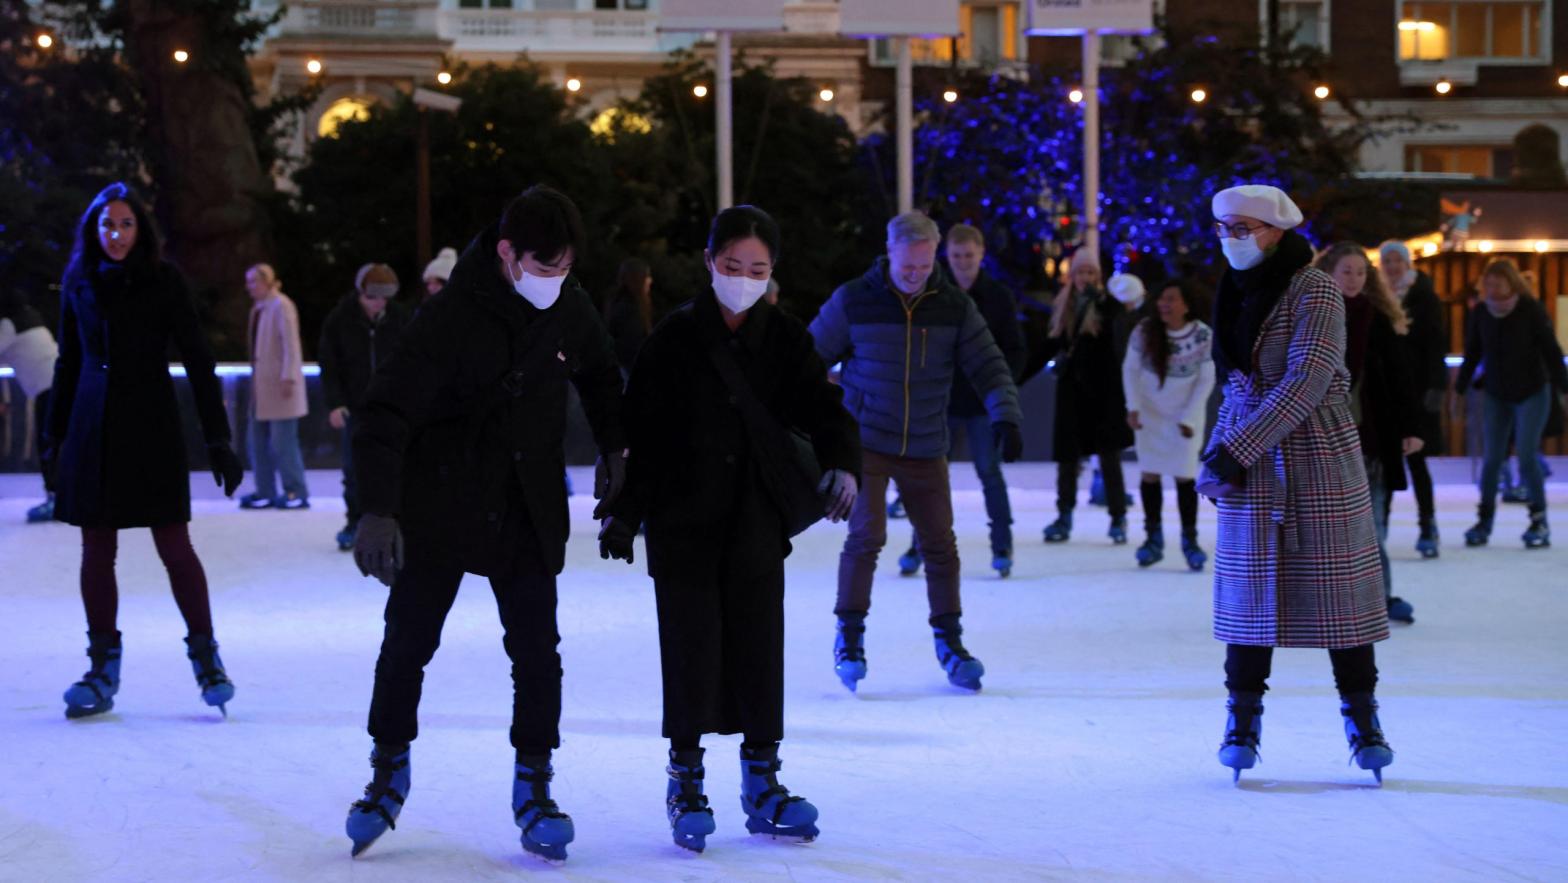 Skaters on the ice rink at the Natural History Museum in central London on December 9, 2021.  (Photo: Hollie Adams / AFP, Getty Images)